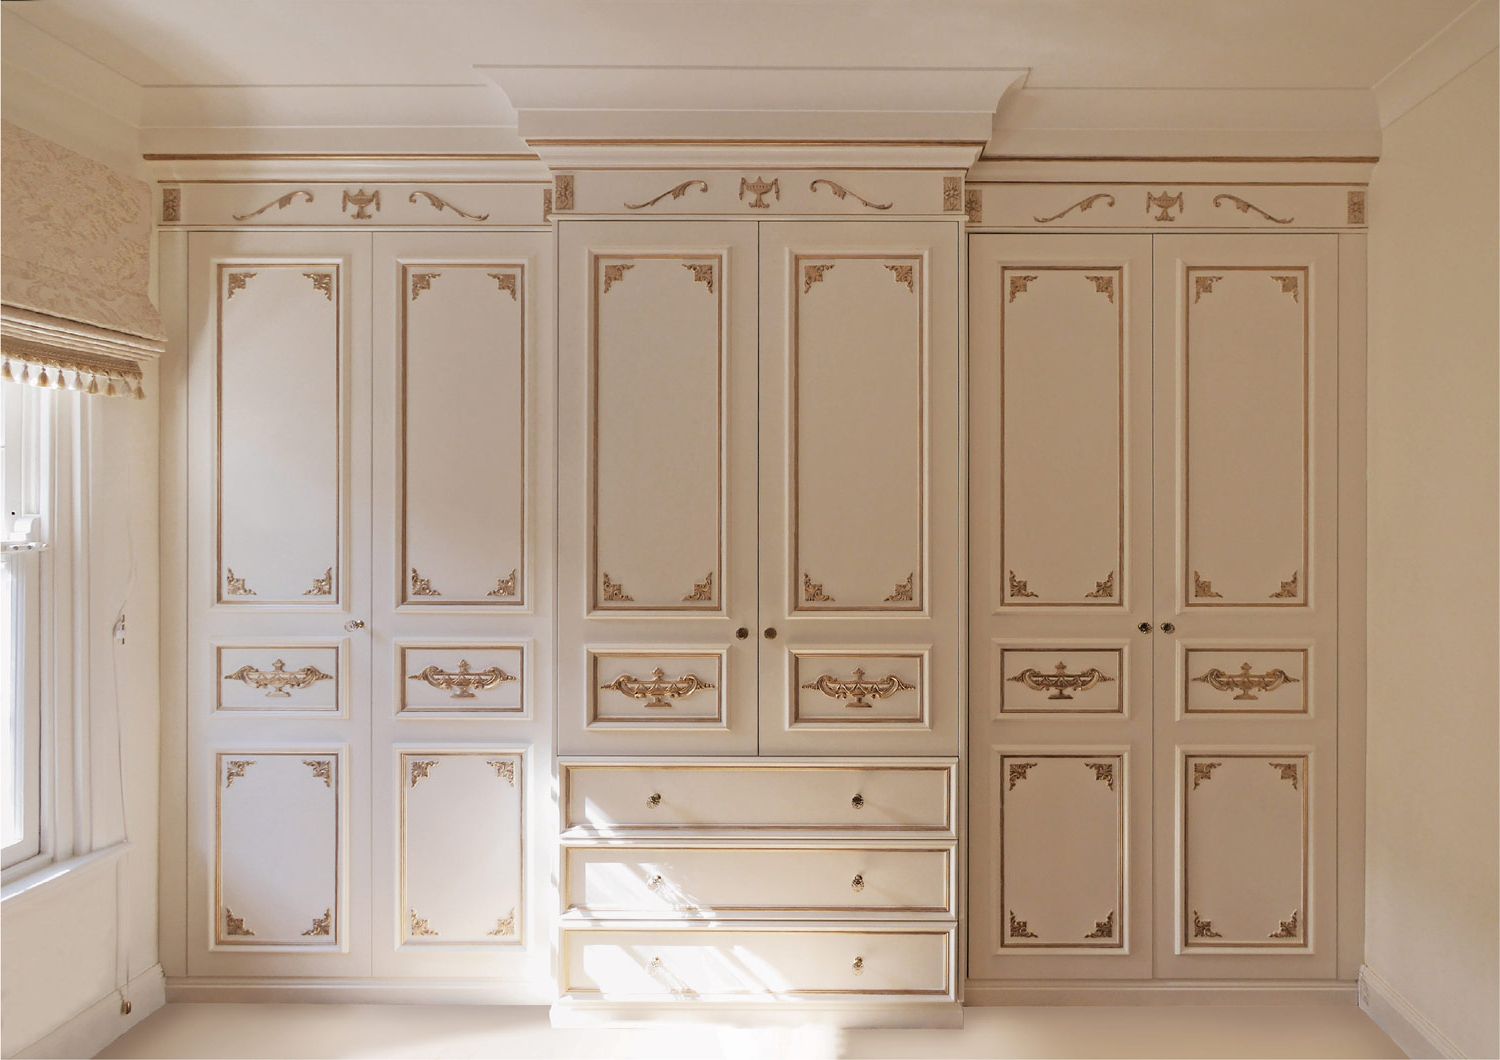 Breathtaking French Wardrobe Designs | Custom Made | Luxury Finishes Intended For French White Wardrobes (View 13 of 20)